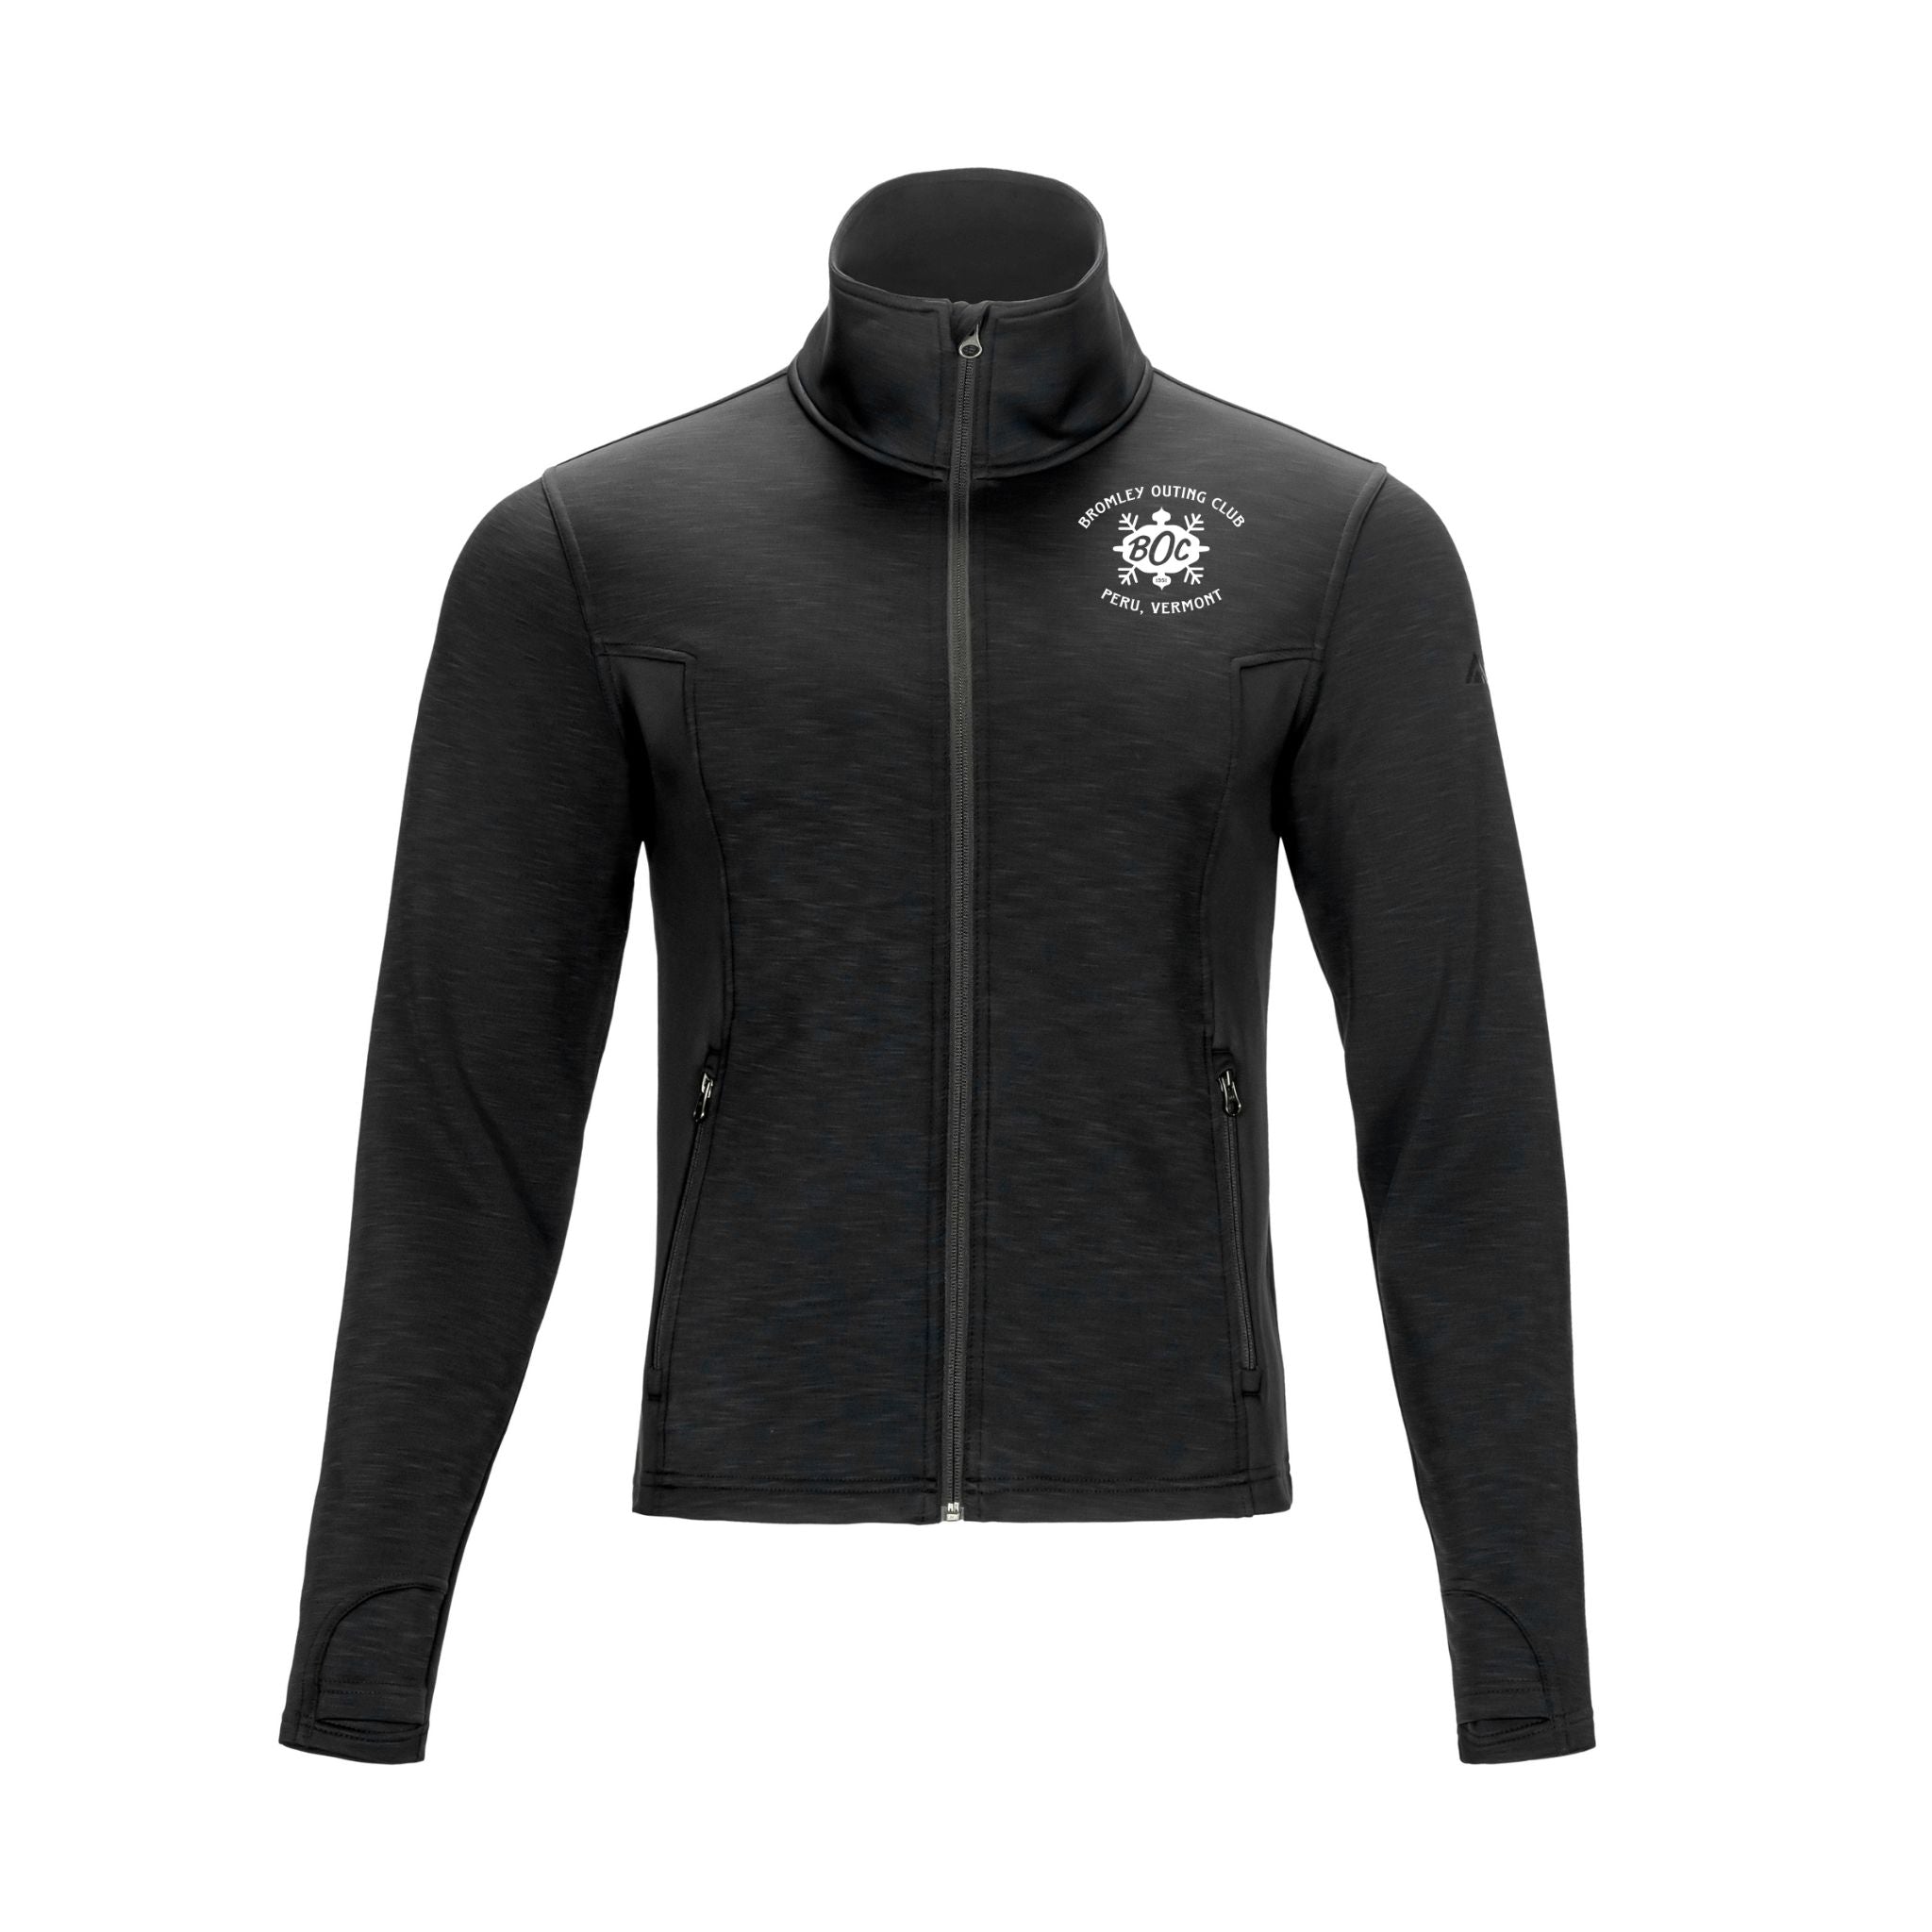 Men's Benchmark Jacket - Bromley Outing Club